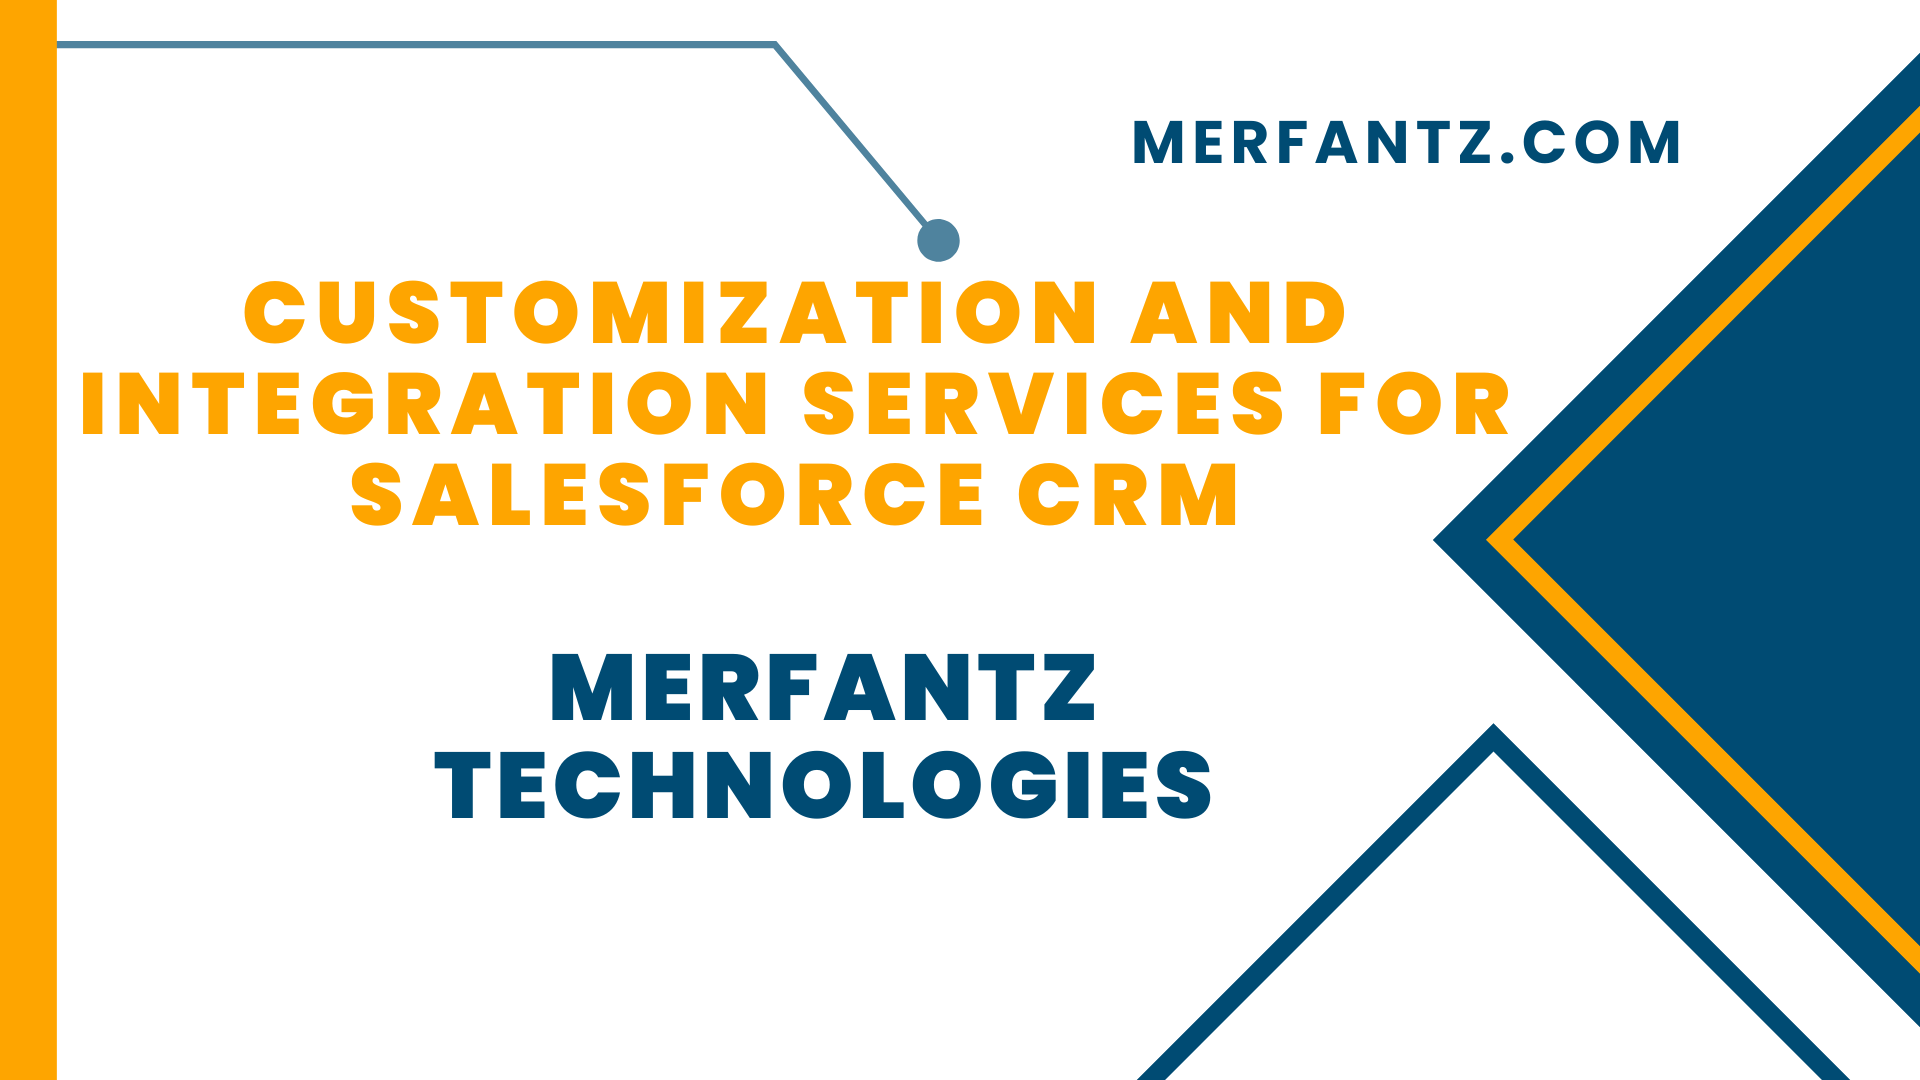 Customization and Integration Services for Salesforce CRM